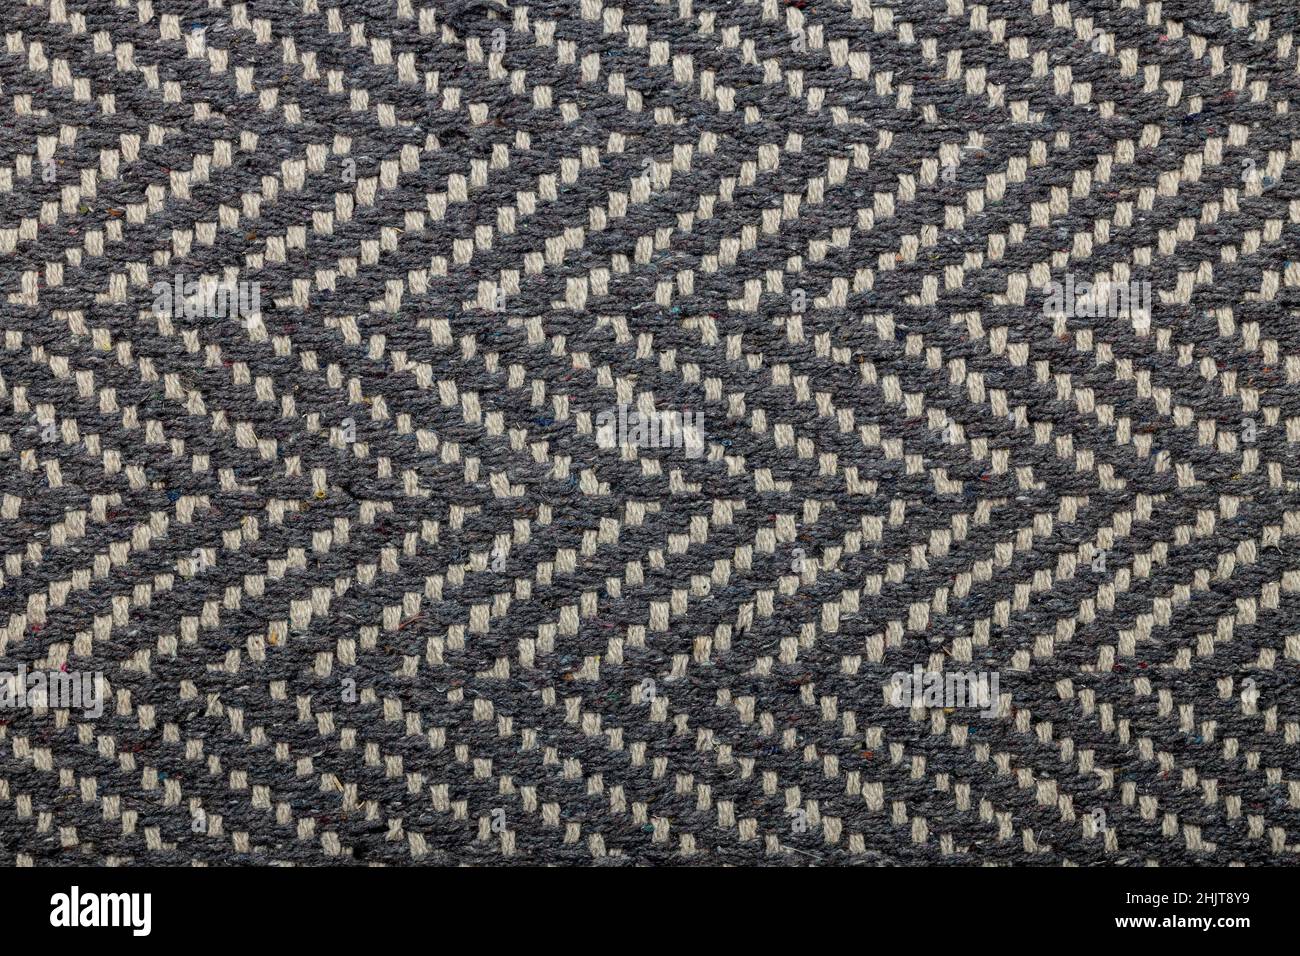 Gray and white patterned texture closeup. Stock Photo